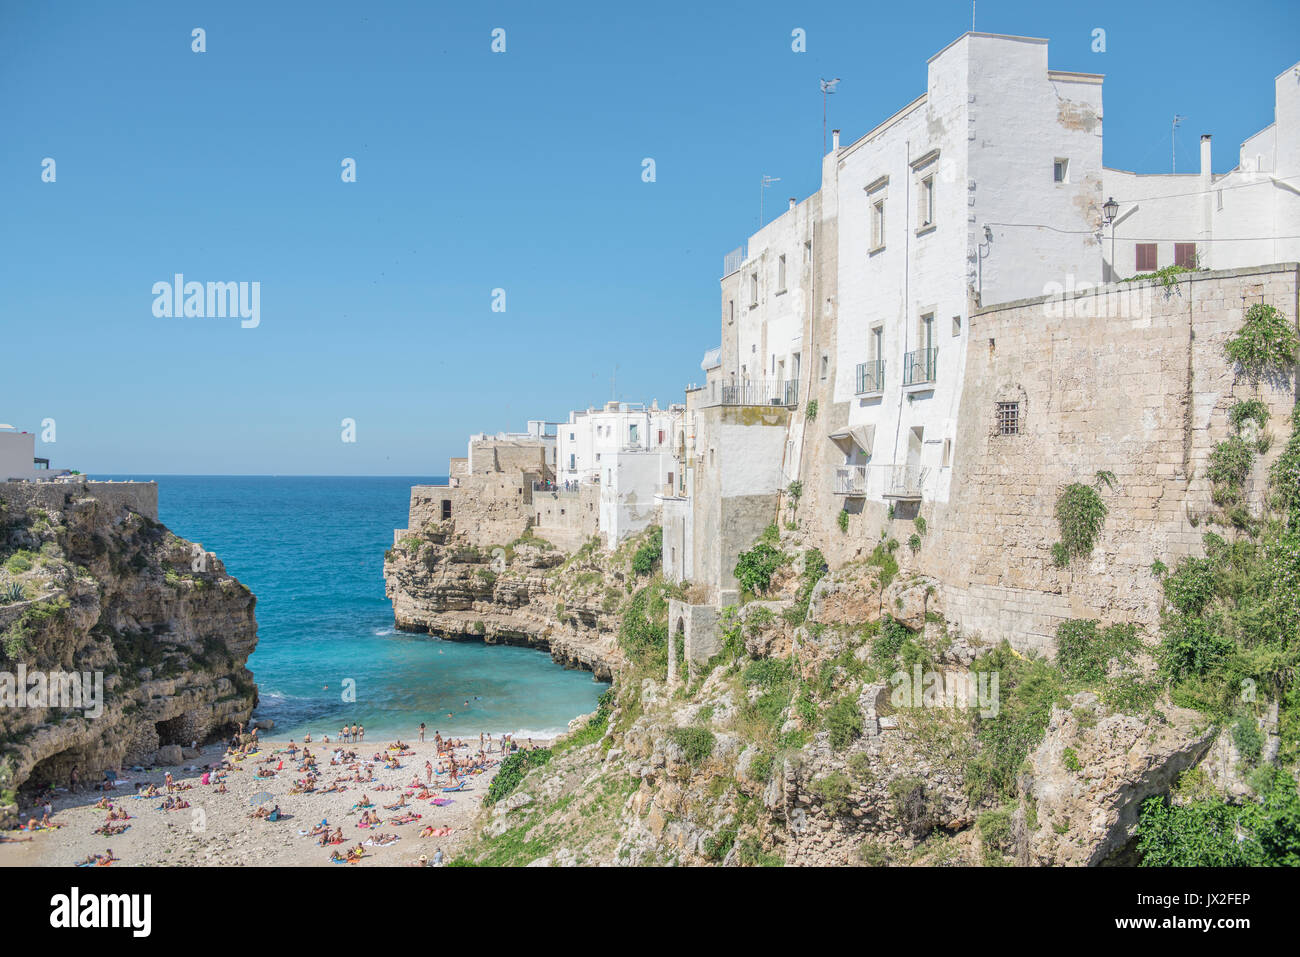 The main beach at Polignano A Mare is nestled in an inlet beneath the Old Town. The famous Red Bull cliff-diving event is held here every year. Stock Photo